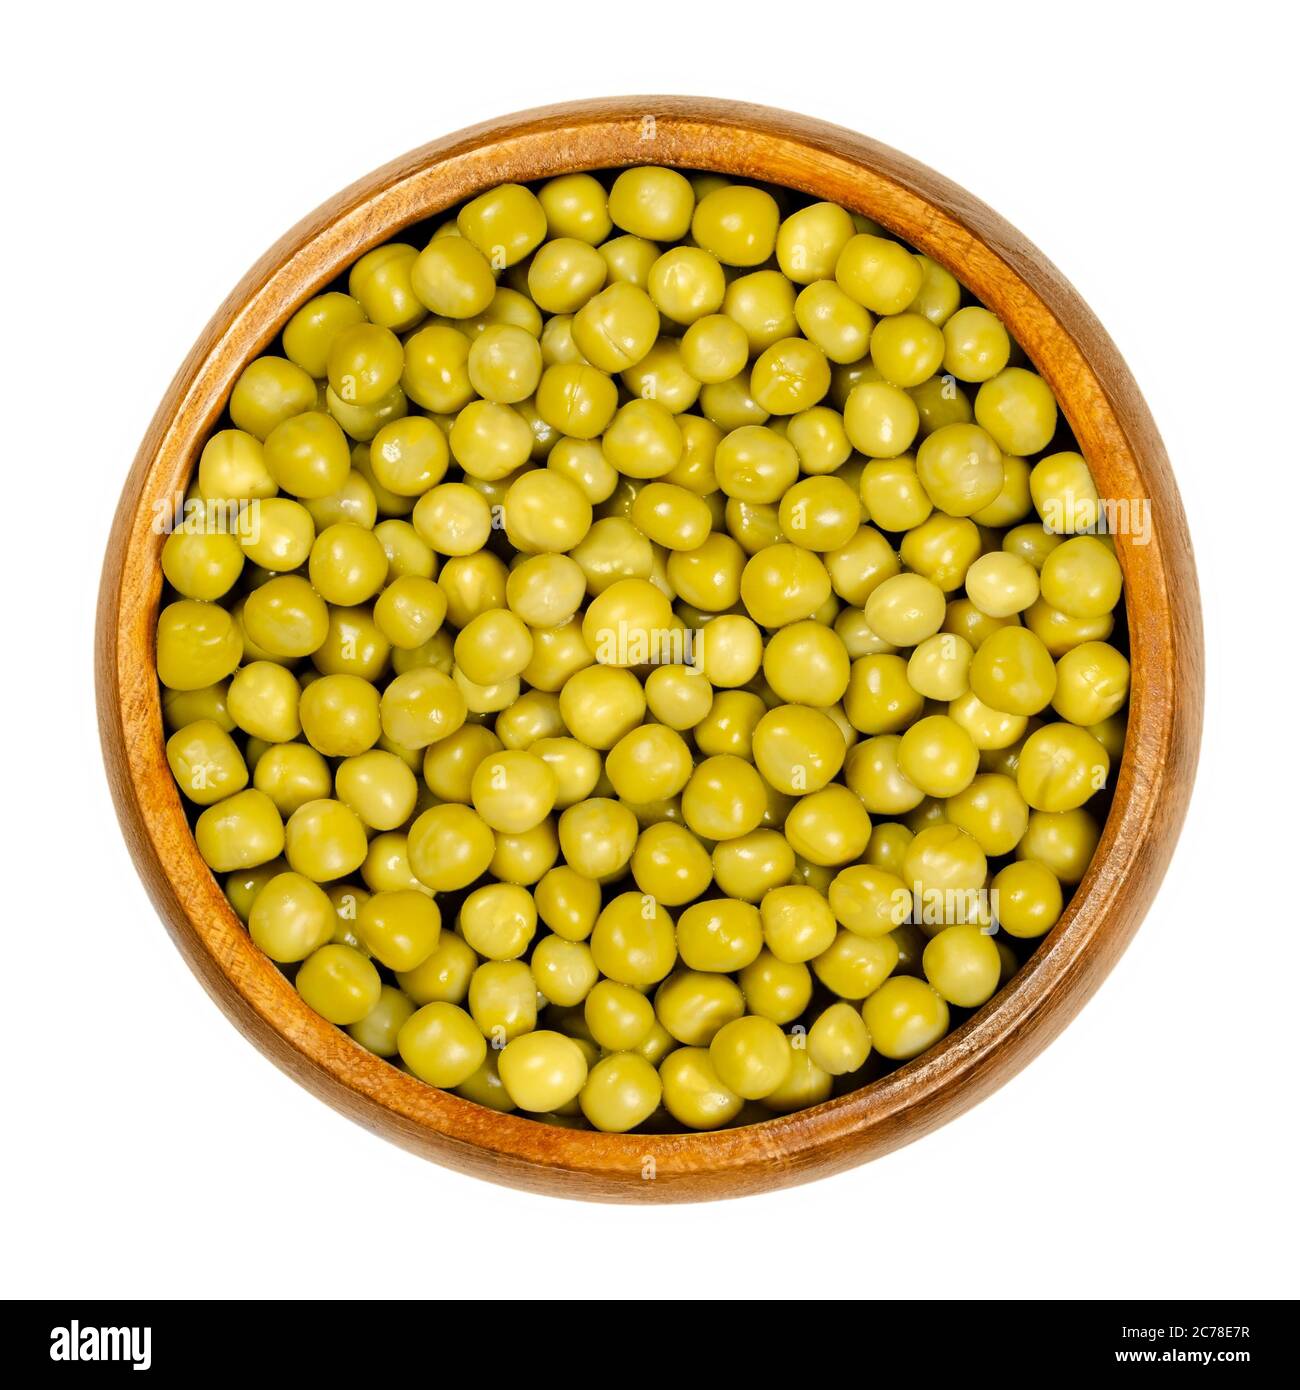 Canned green peas in wooden bowl. Small spherical seeds of the pod fruit Pisum sativum, boiled and canned to preserve the legumes. Closeup from above. Stock Photo